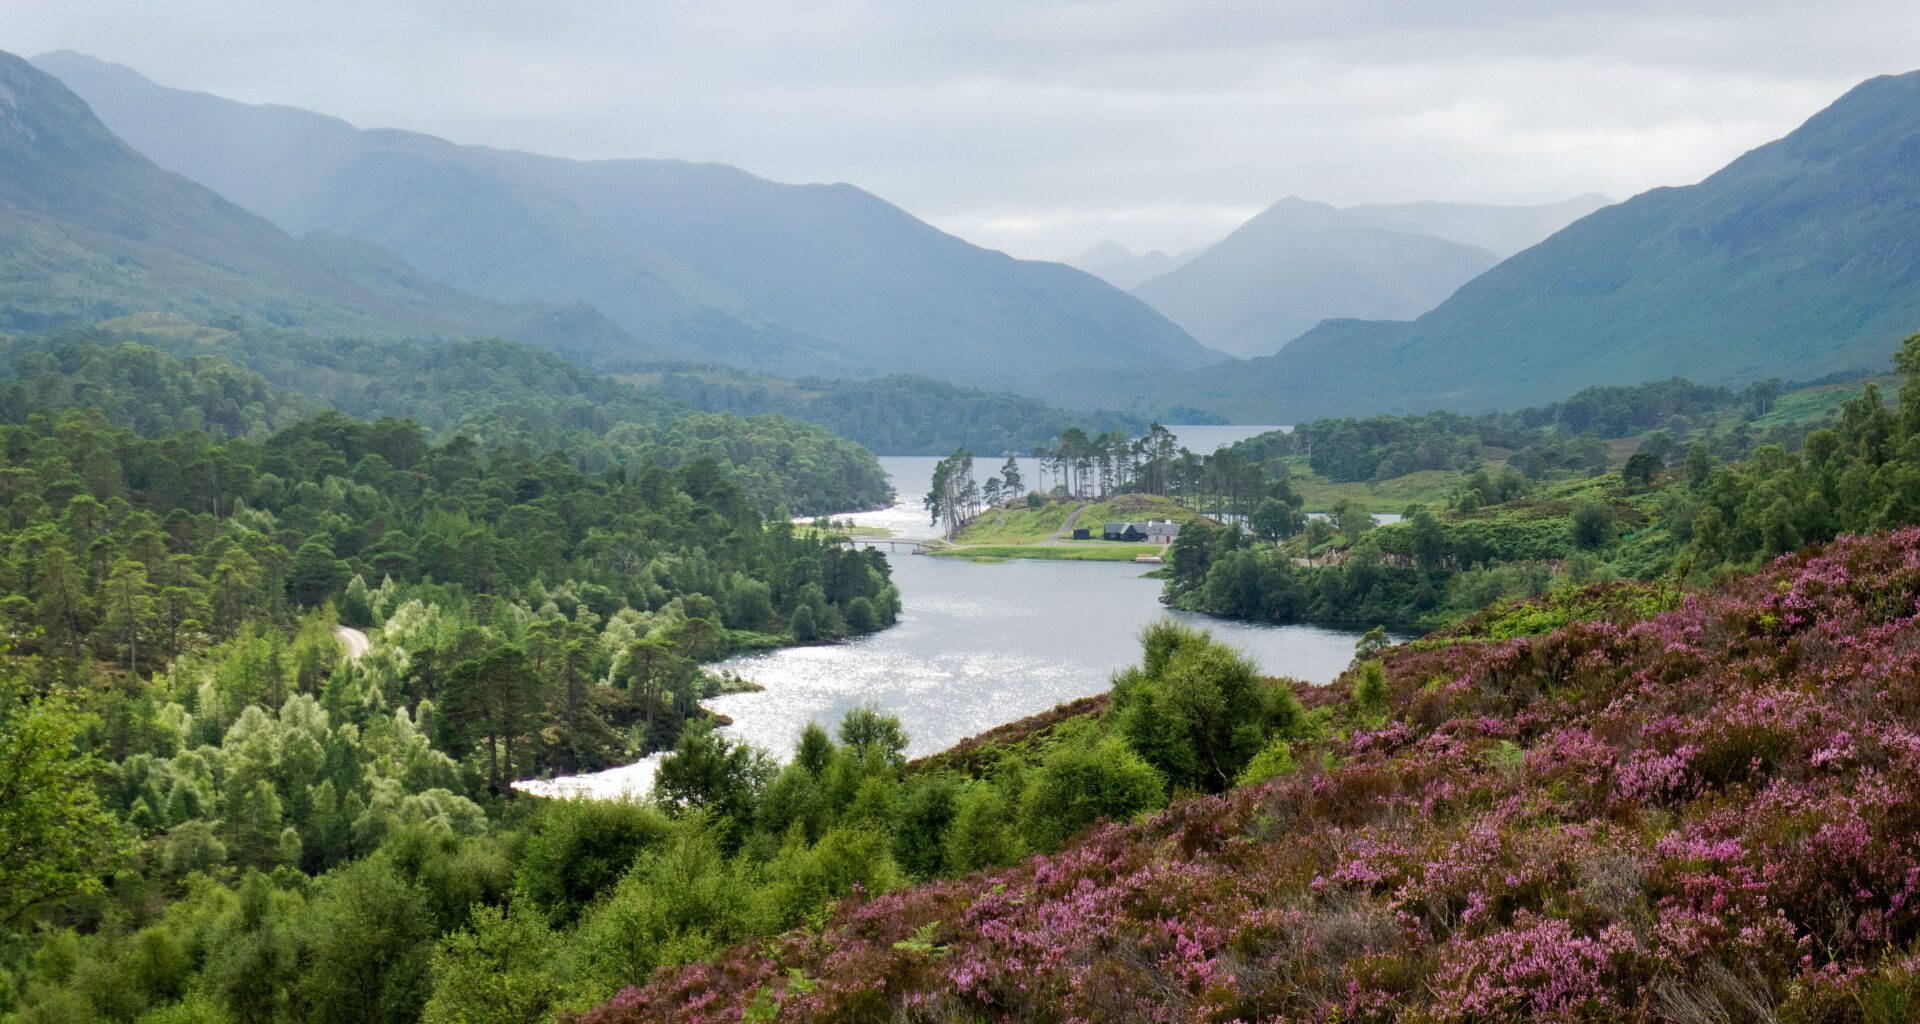 Glen Affric: Pippa Middleton’s family estate urged to stop deterring access 4